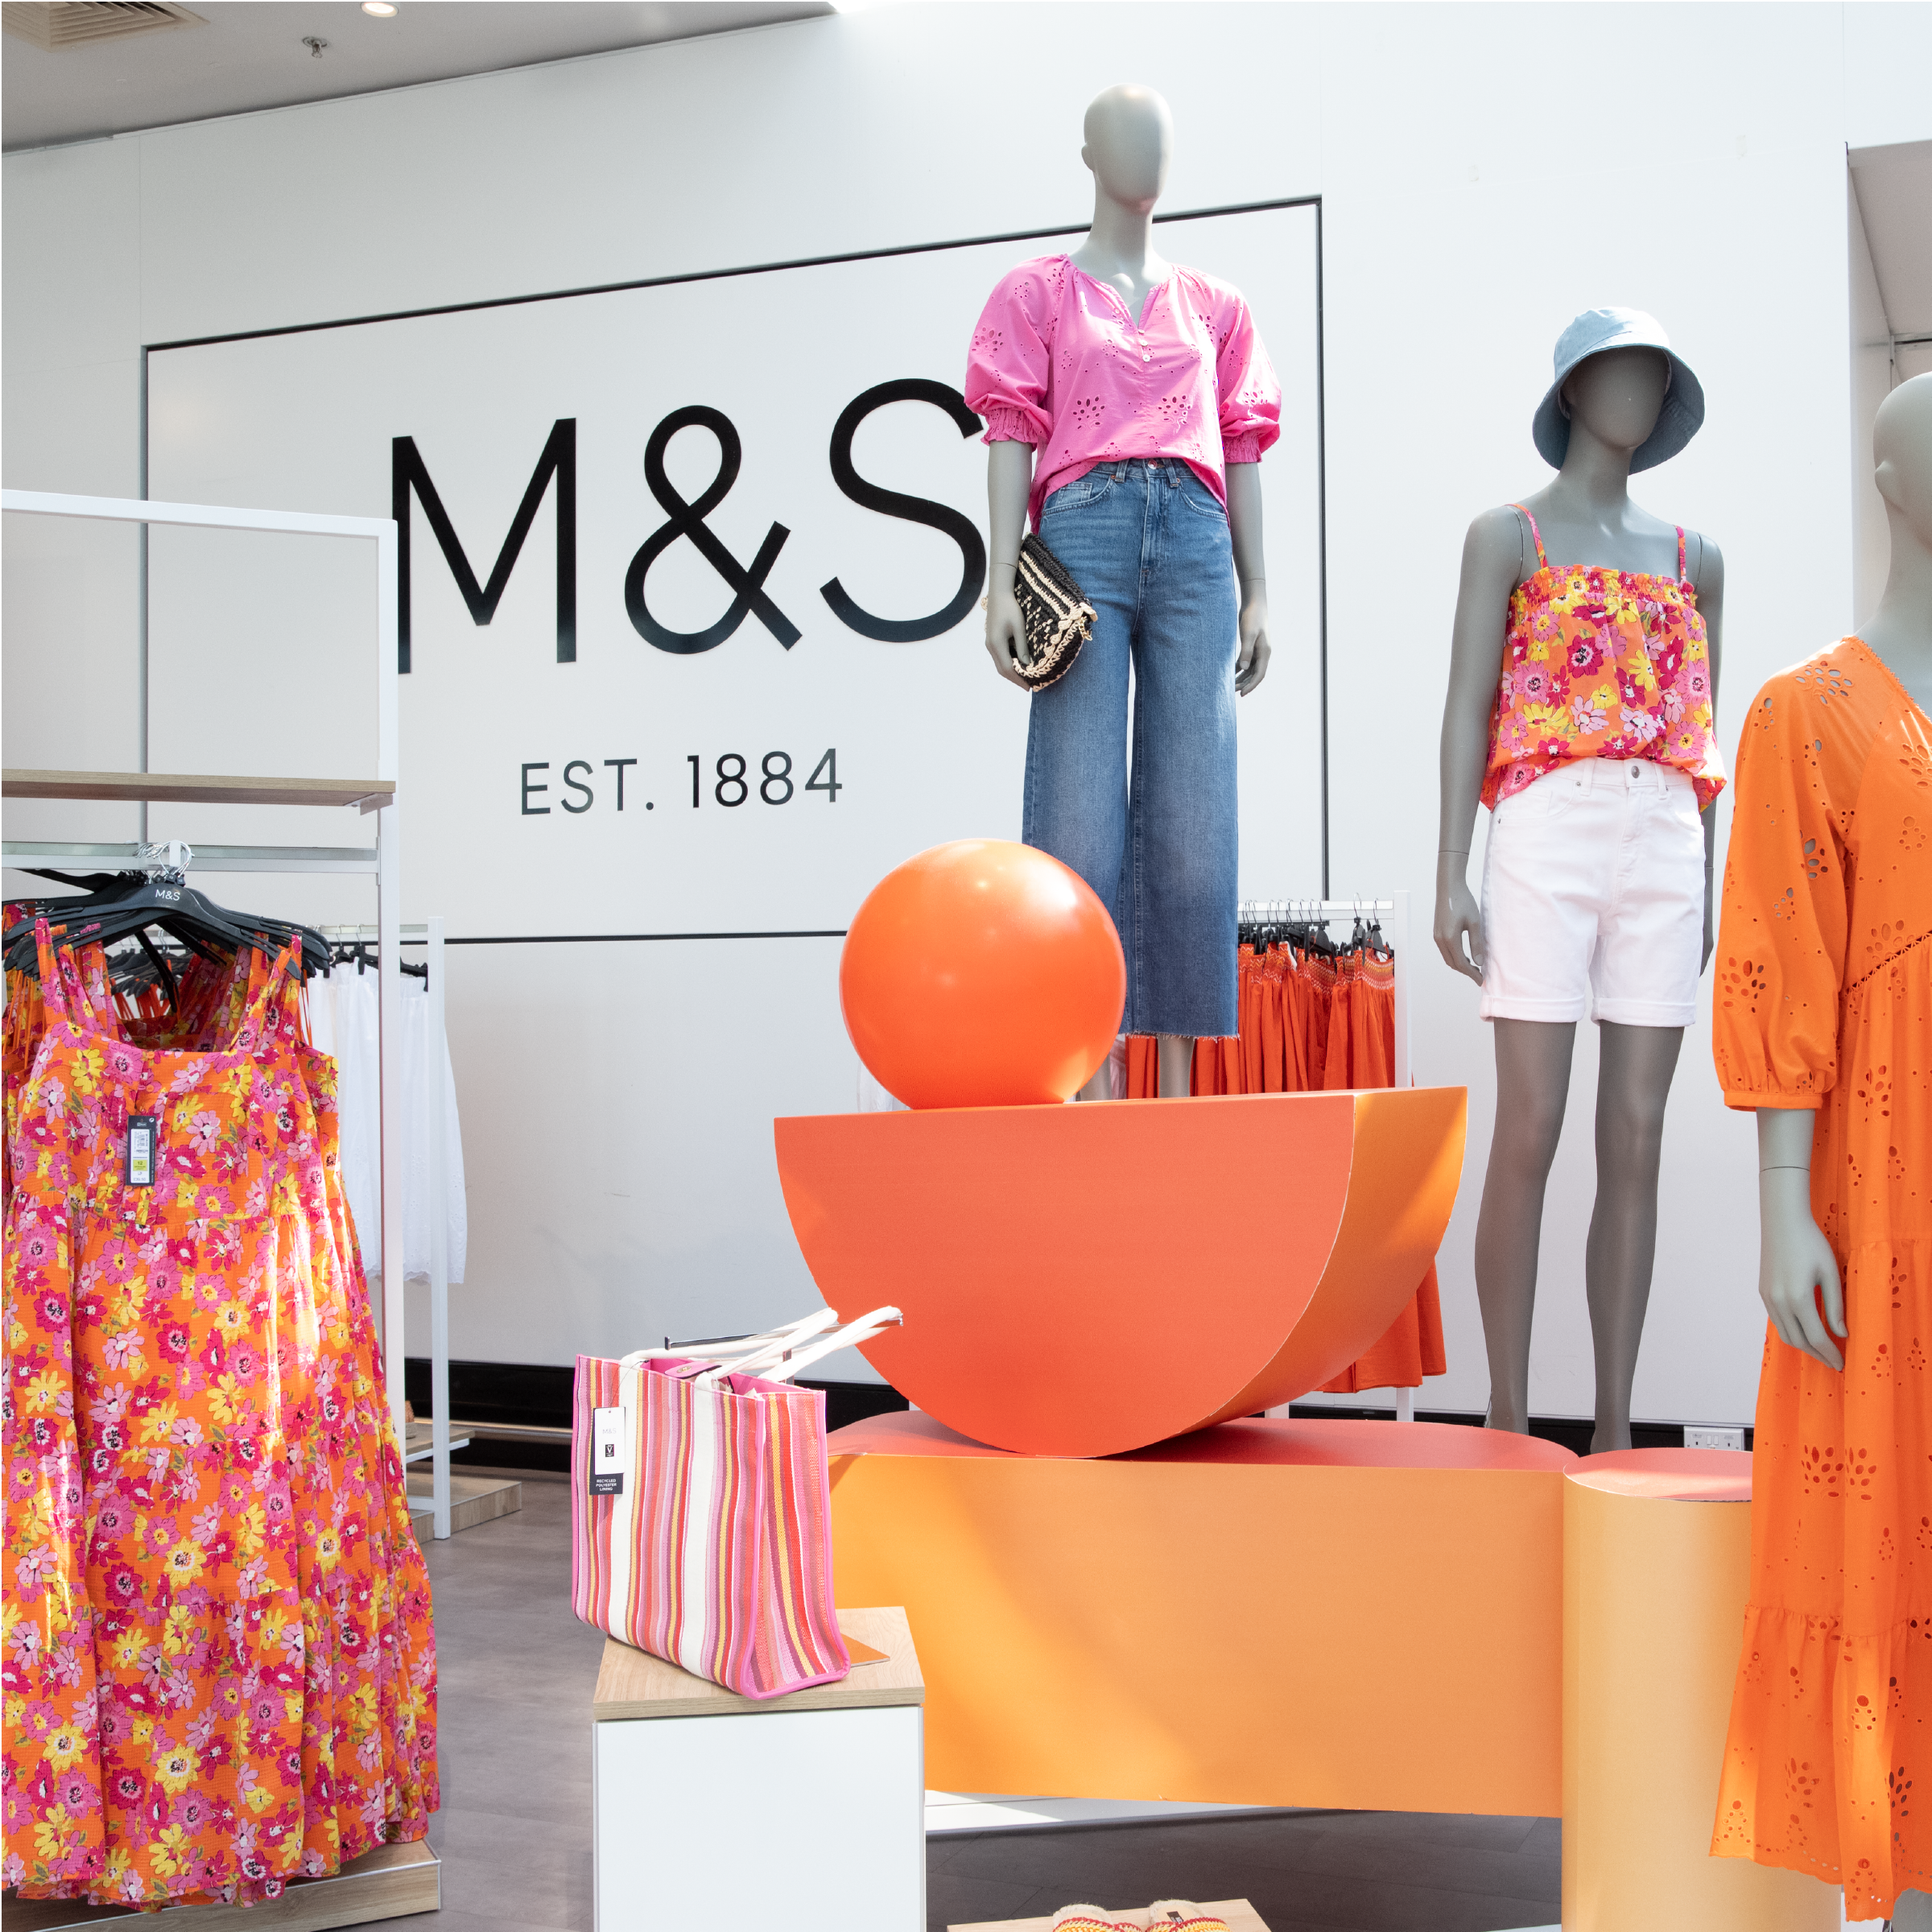 M&S at Spruceifled Centre